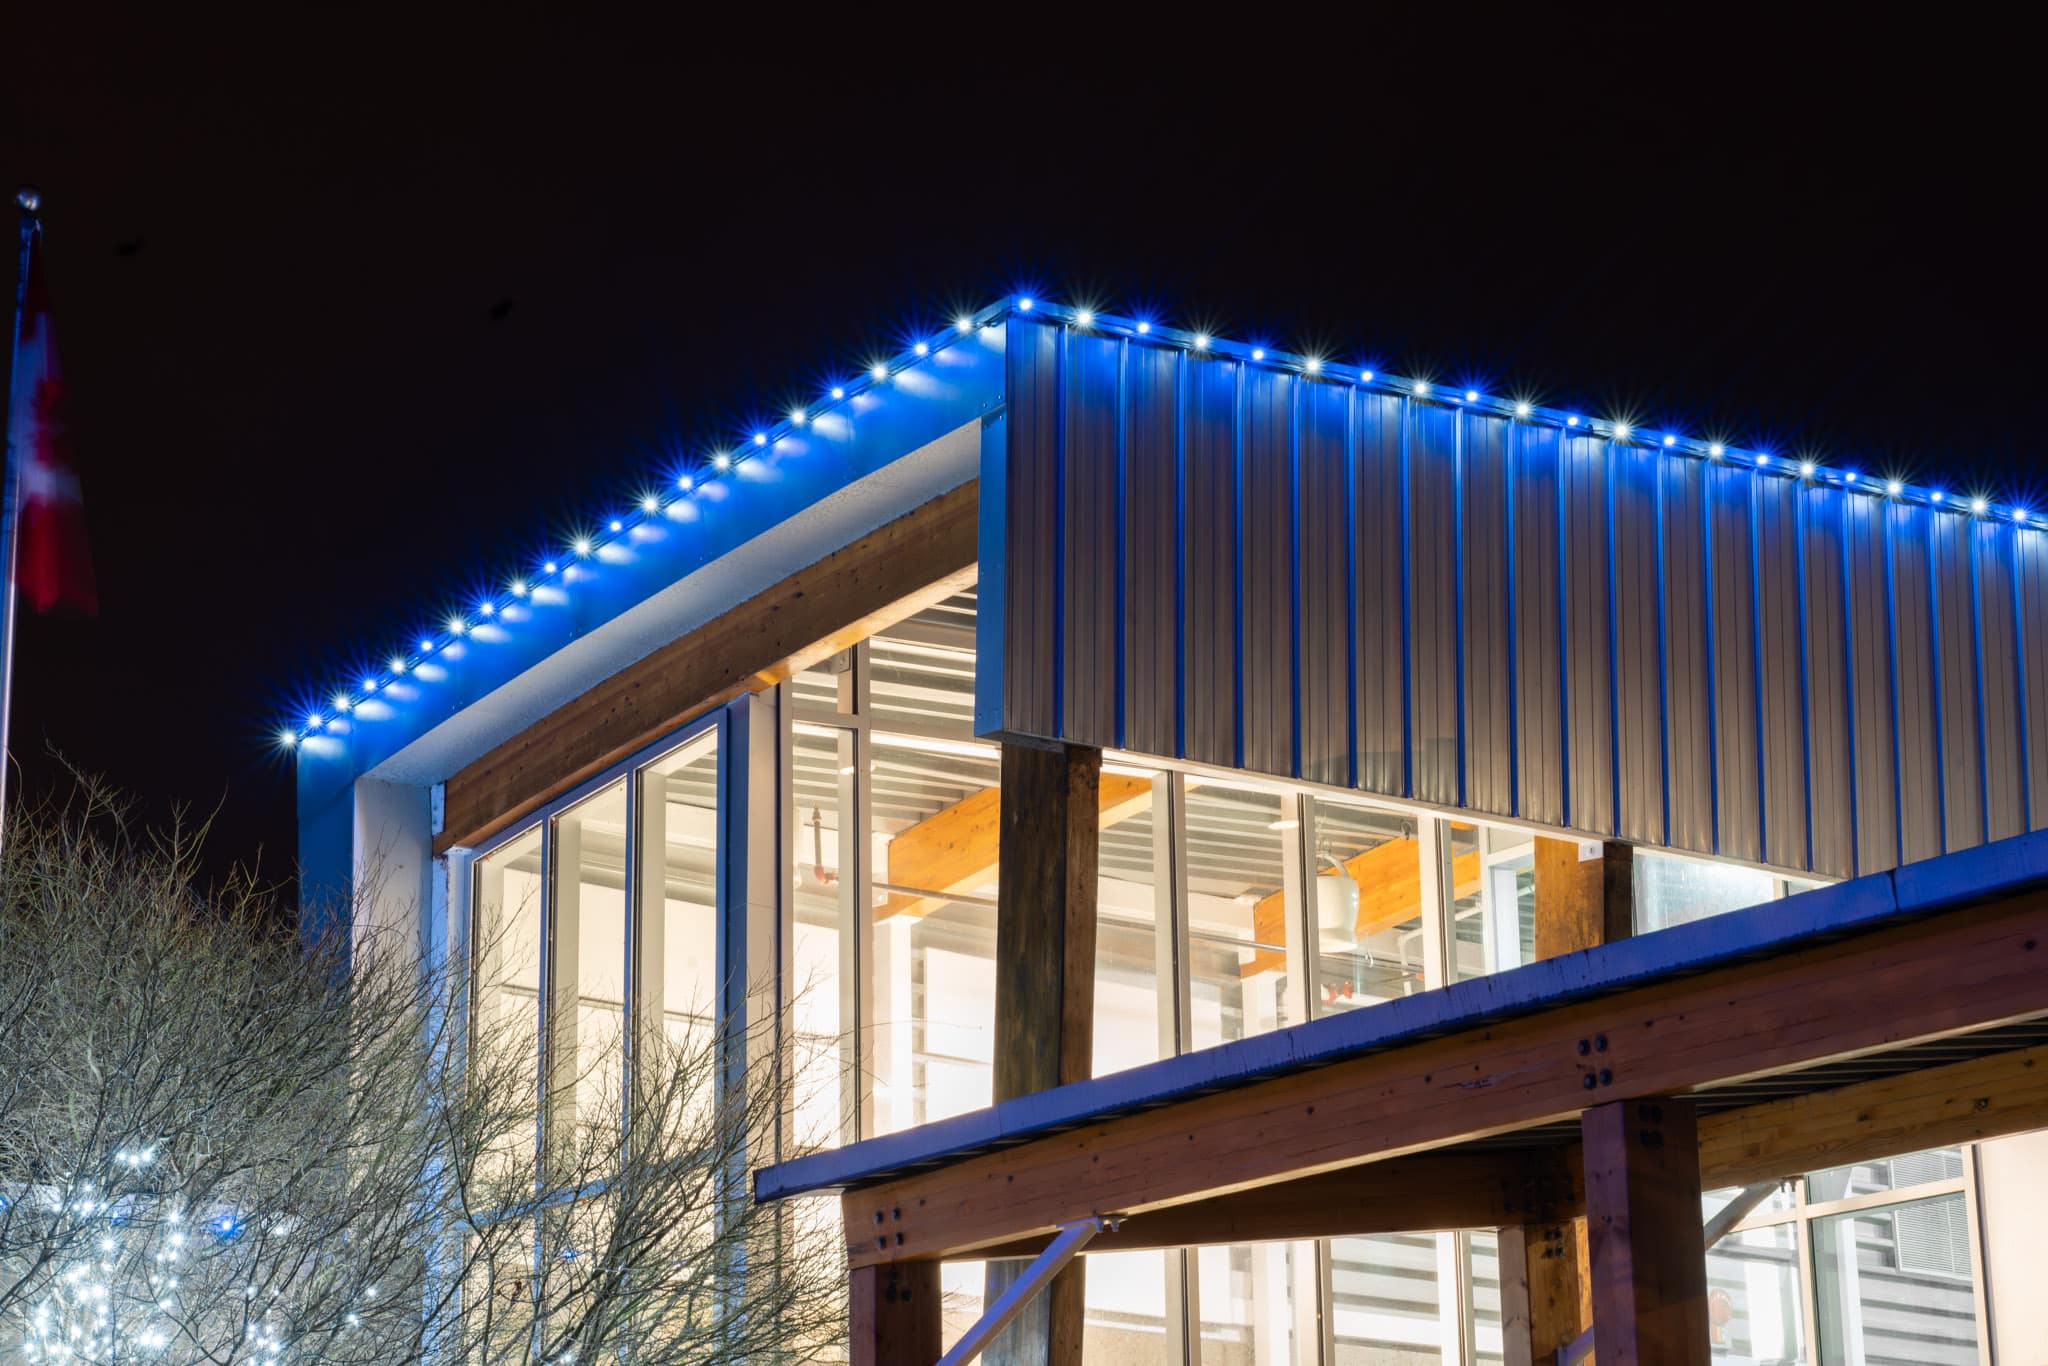 Blue and white coloured lights illuminate a commercial building at night.